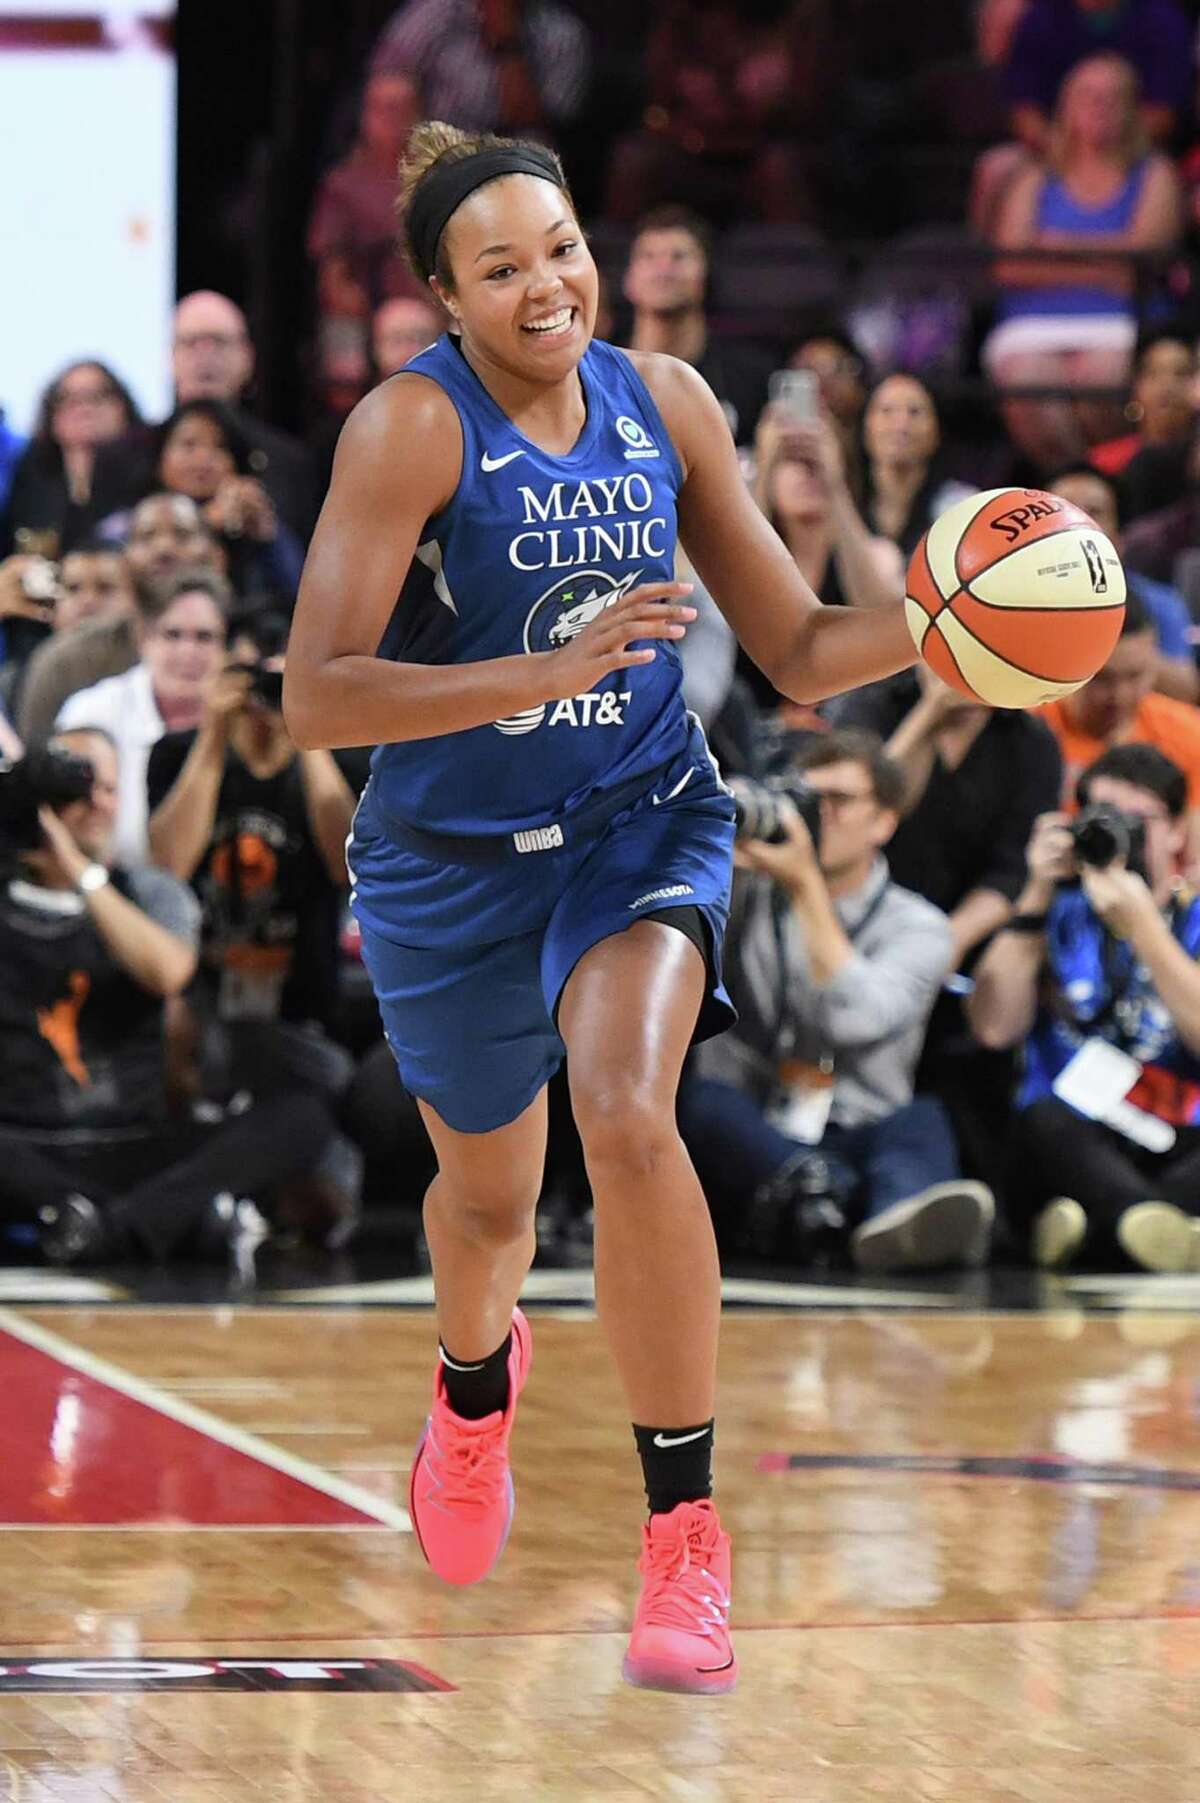 LAS VEGAS, NEVADA - JULY 26: Napheesa Collier of the Minnesota Lynx competes during the Skills Challenge of the WNBA All-Star Friday Night at the Mandalay Bay Events Center on July 26, 2019 in Las Vegas, Nevada. NOTE TO USER: User expressly acknowledges and agrees that, by downloading and or using this photograph, User is consenting to the terms and conditions of the Getty Images License Agreement. (Photo by Ethan Miller/Getty Images)